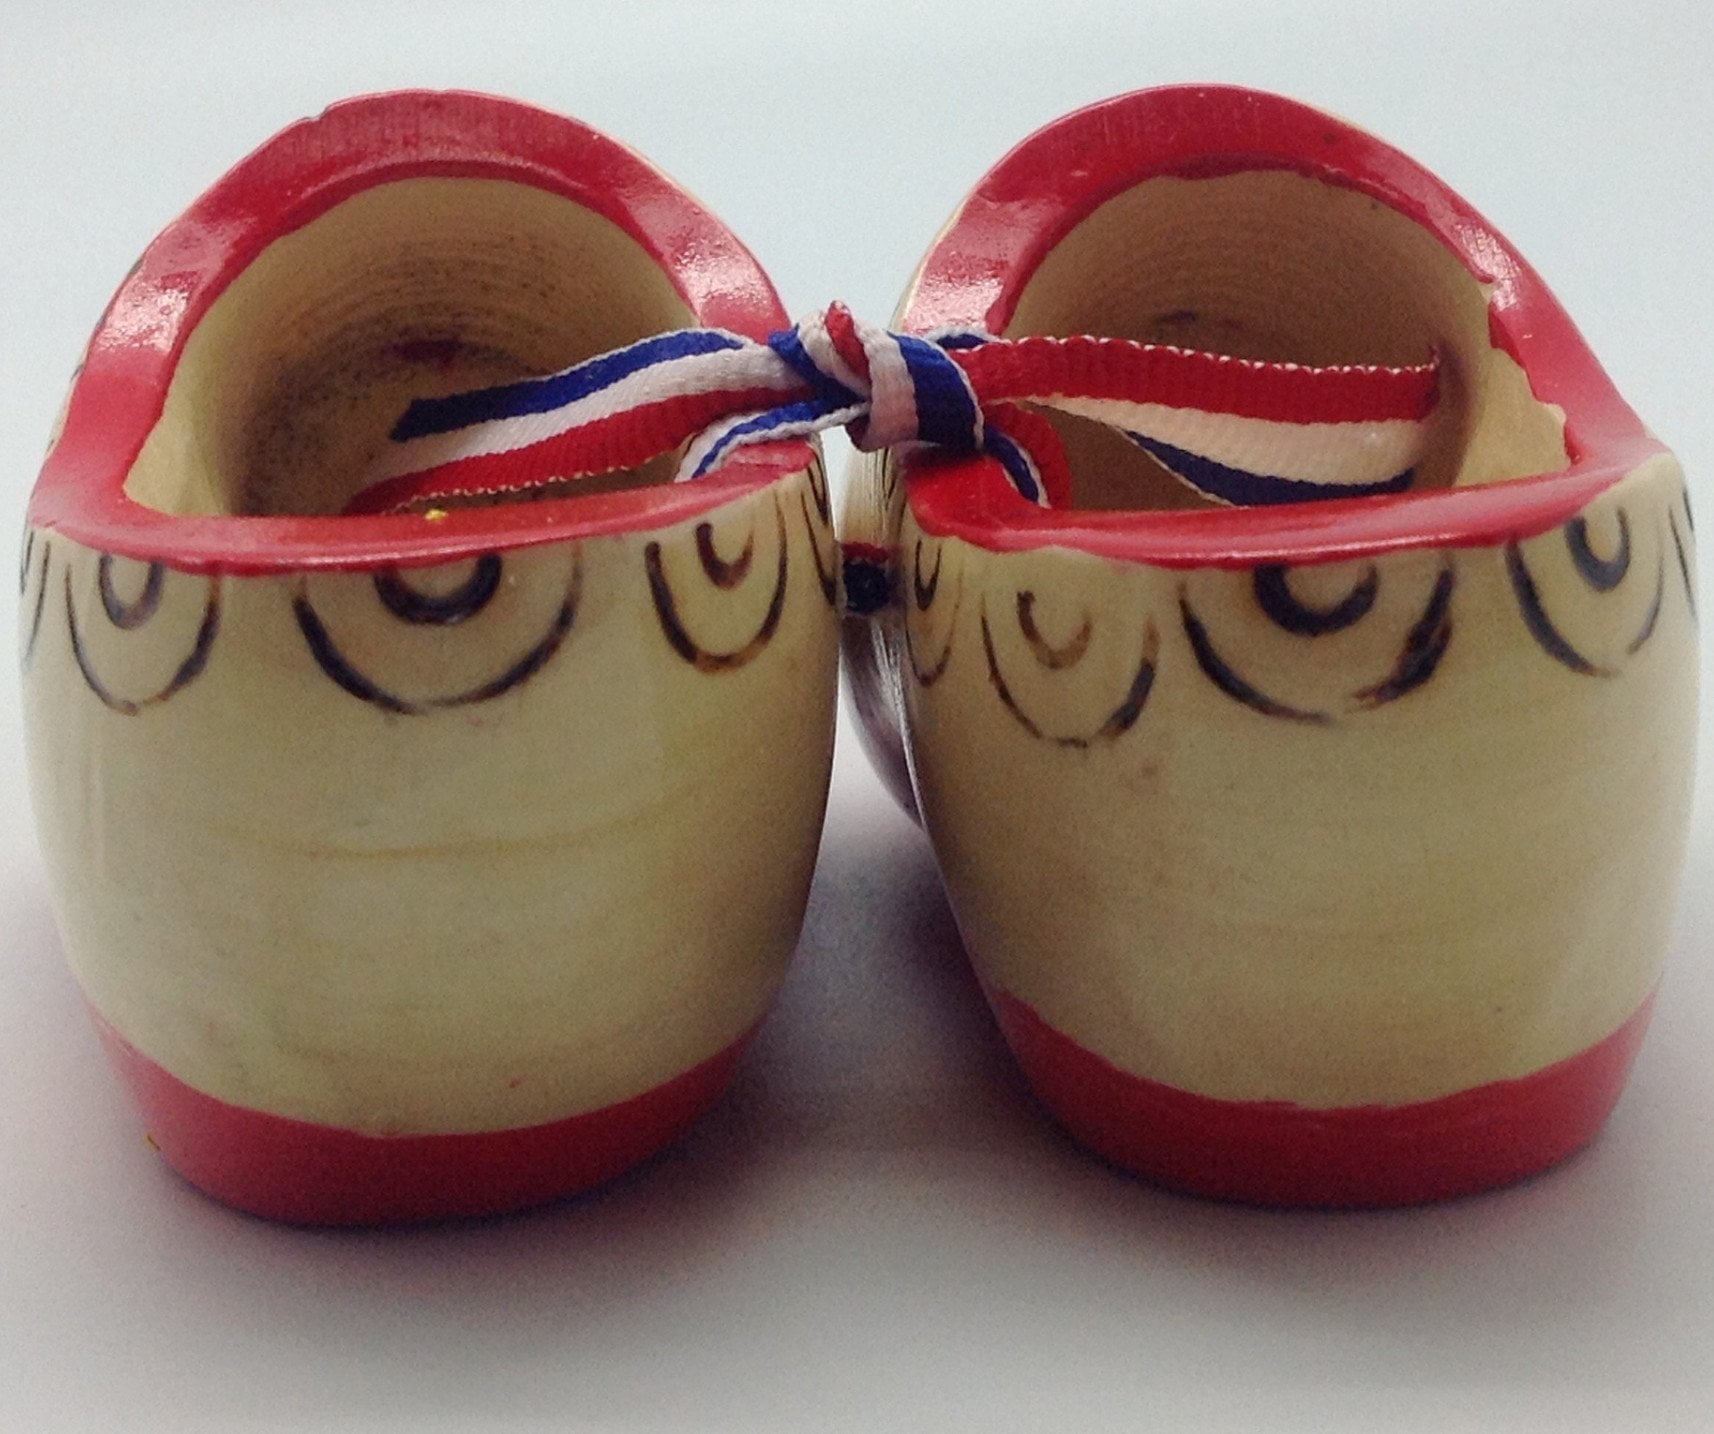 Vintage Rustic Hand Painted Wooden Gnome Shoes Wooden Doll Shoes Wooden  Shoes Doll Supplies Wooden Shoes Fairy Garden Nr 2 -  Hong Kong